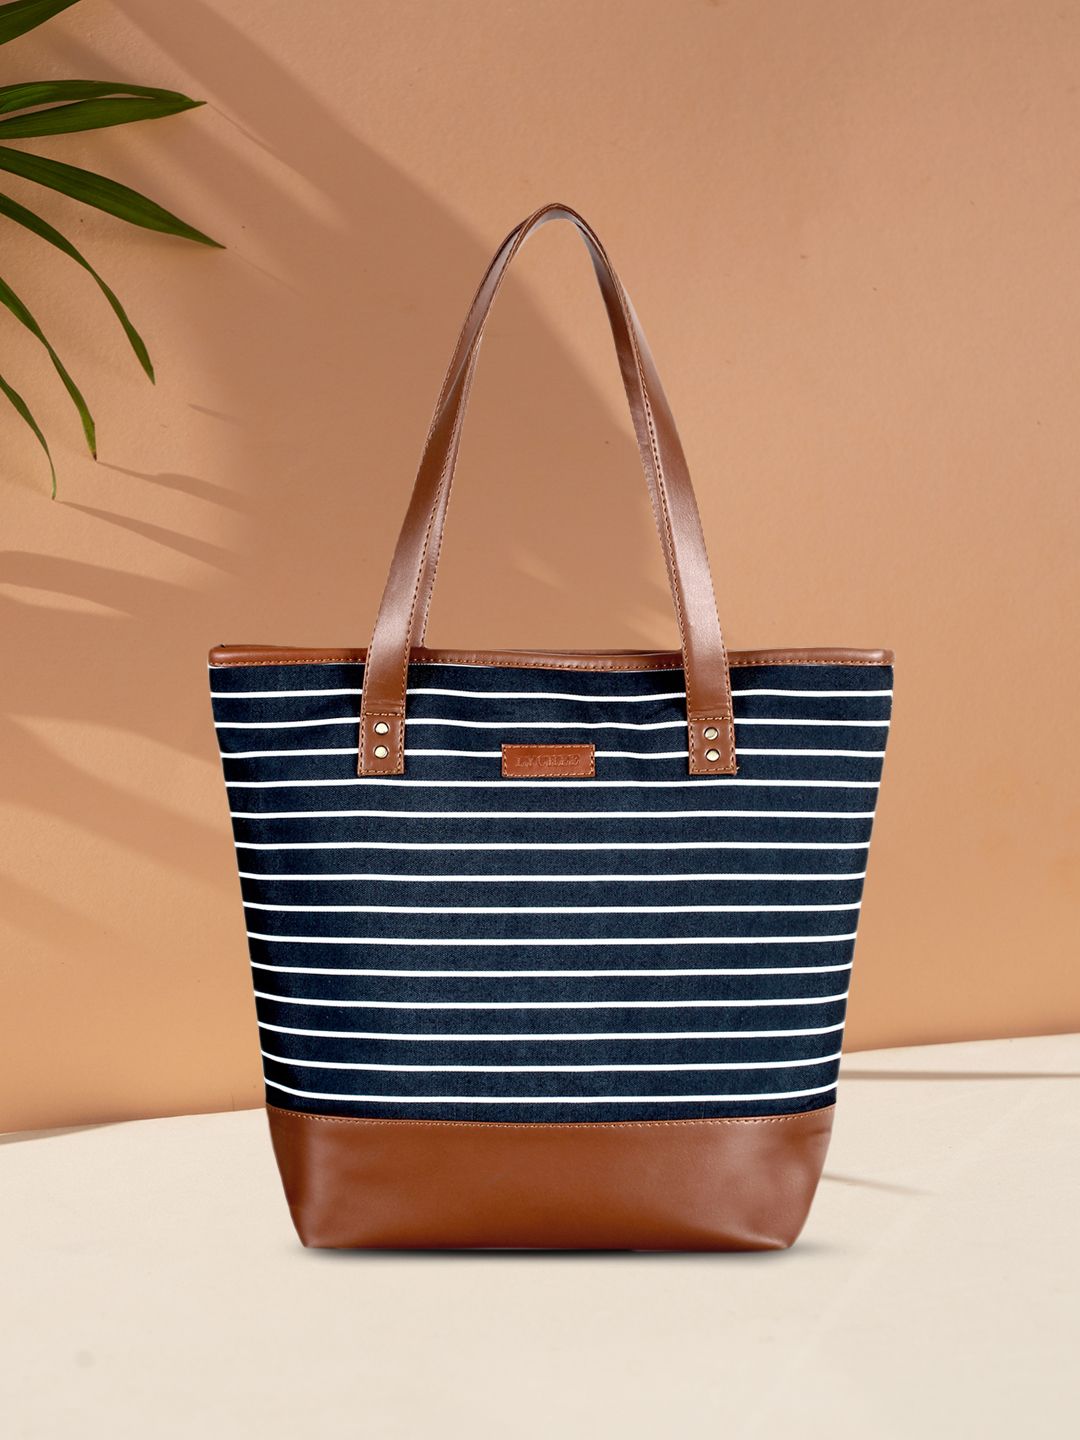 Lychee bags Black & White Striped Tote Bag Price in India